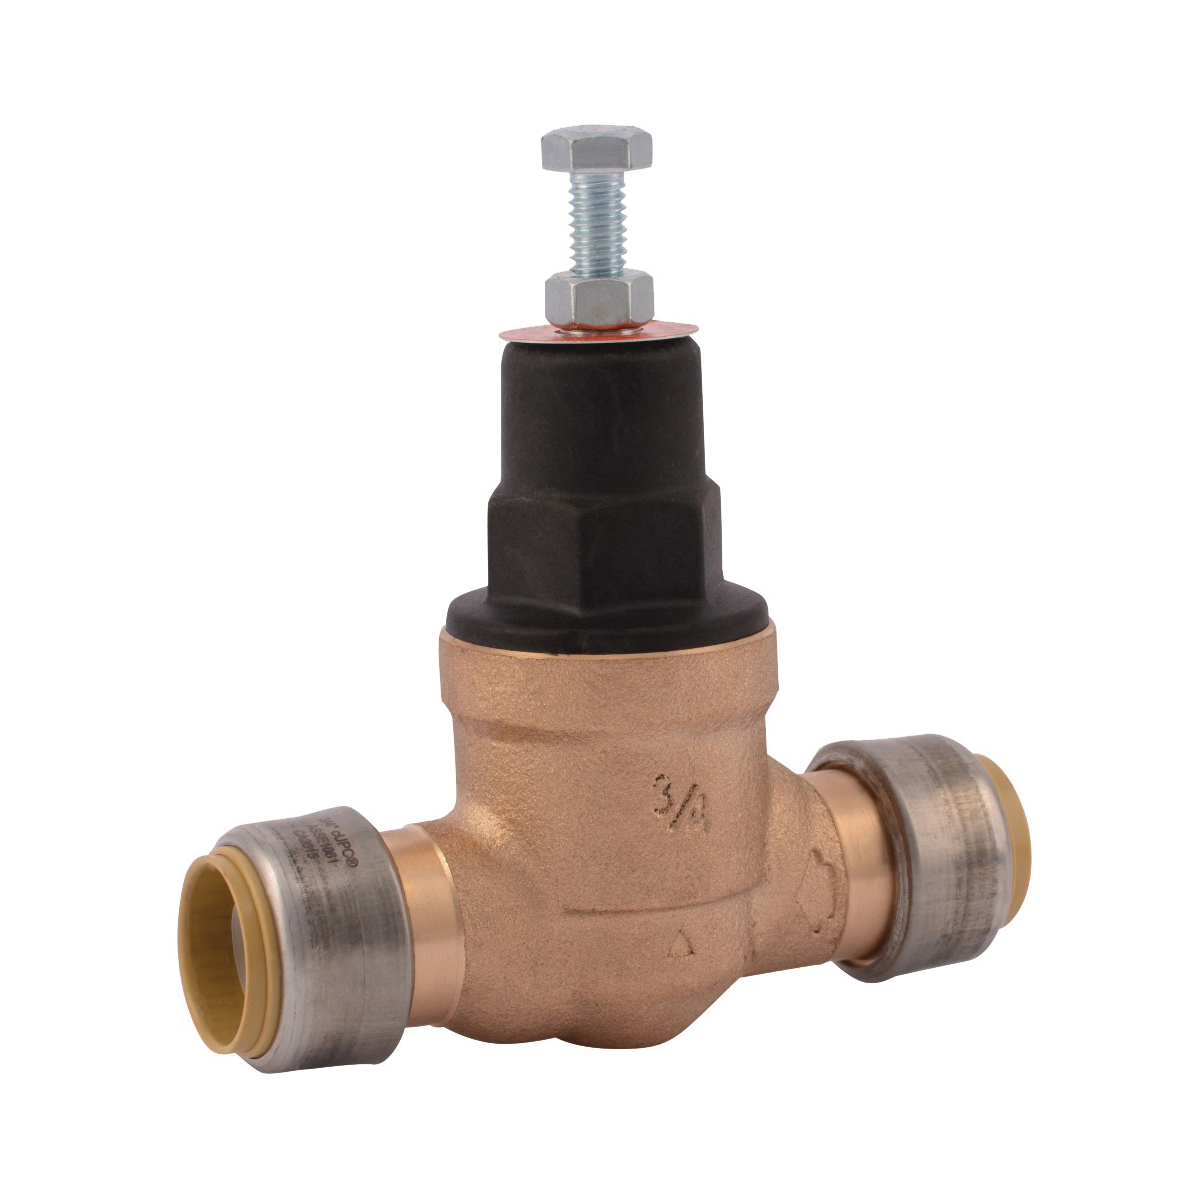 EB45 Series 23808-0045 Pressure Regulating Valve, 3/4 in Connection, Push-Fit, Bronze Body